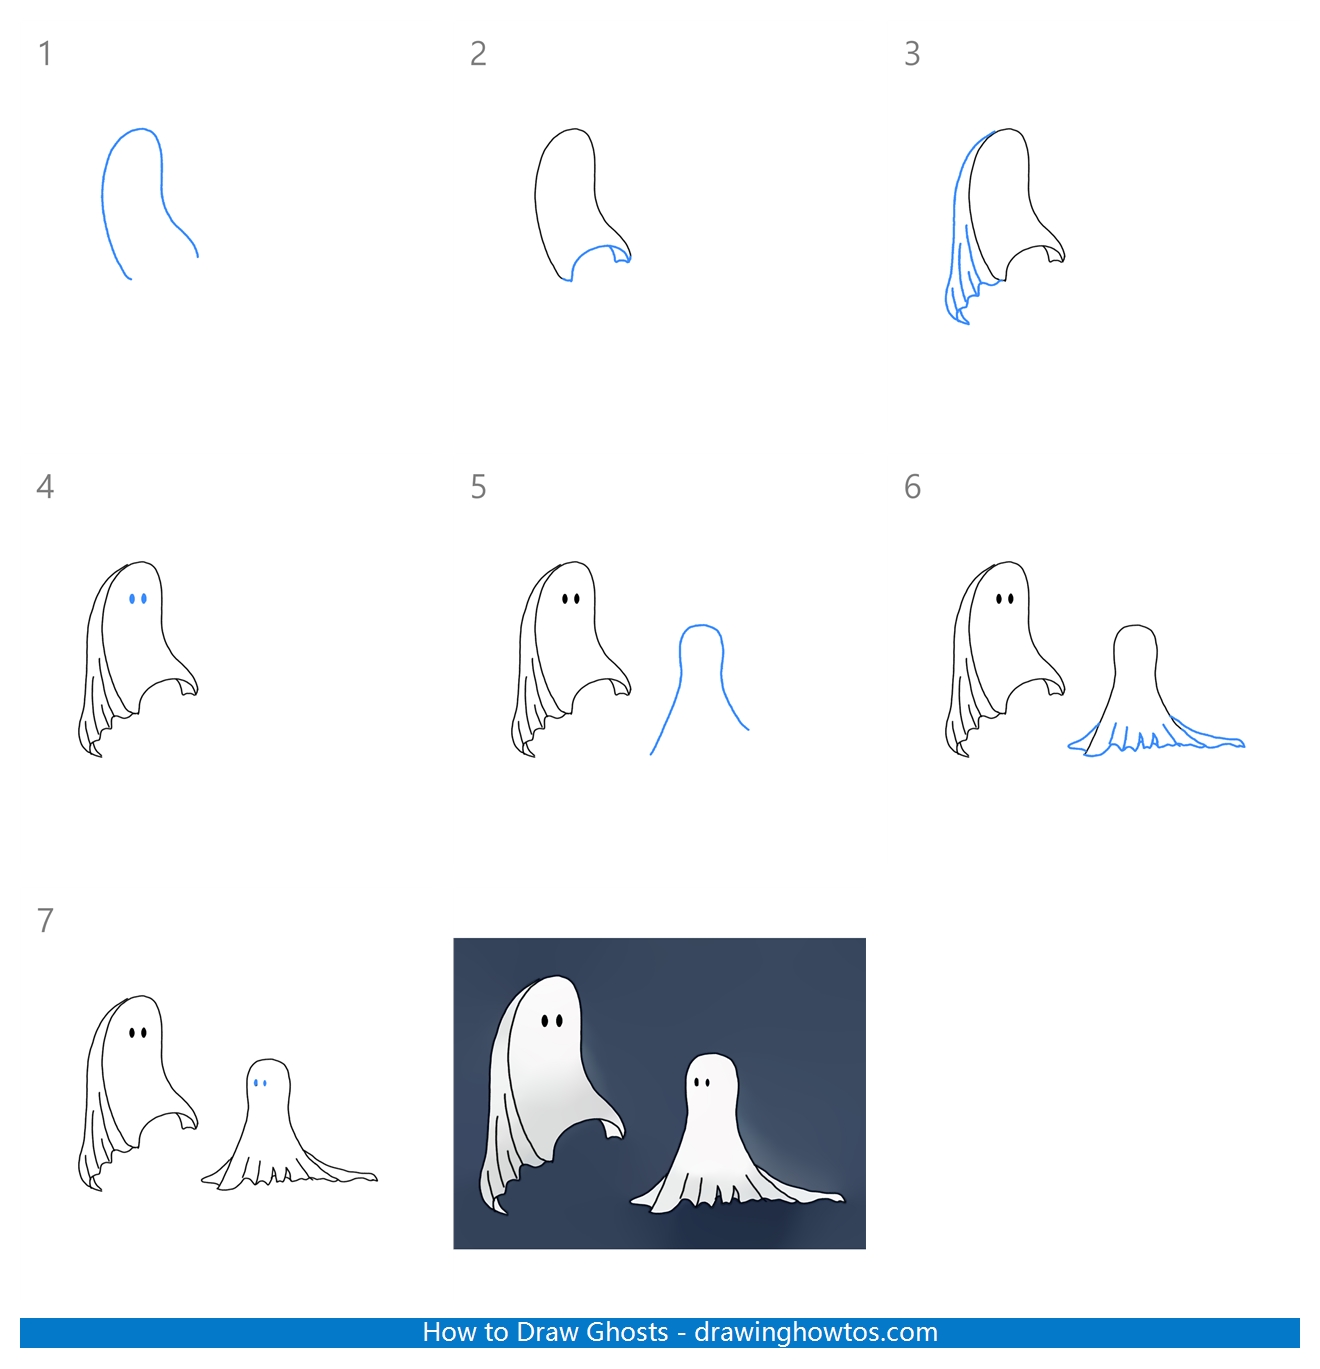 How to Draw Ghosts Step by Step